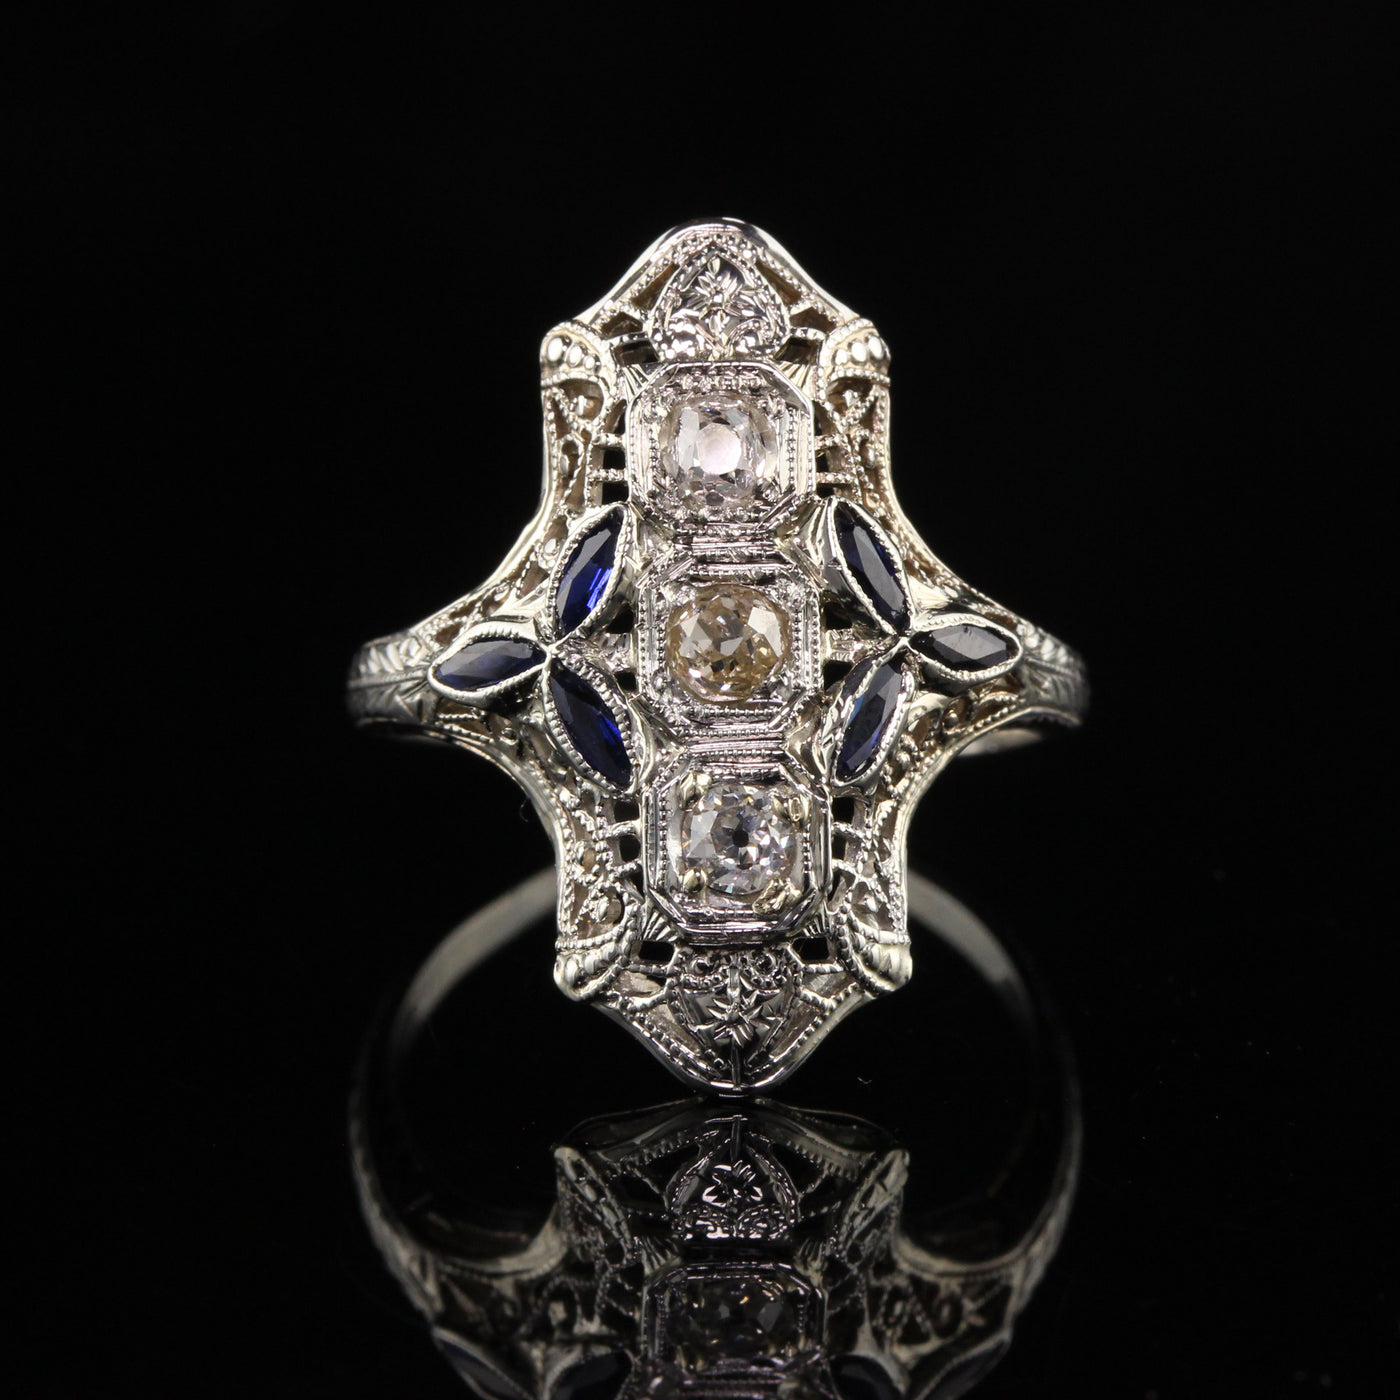 Antique Art Deco 18K White Gold Old Mine Cut Diamond and Sapphire Shield Ring